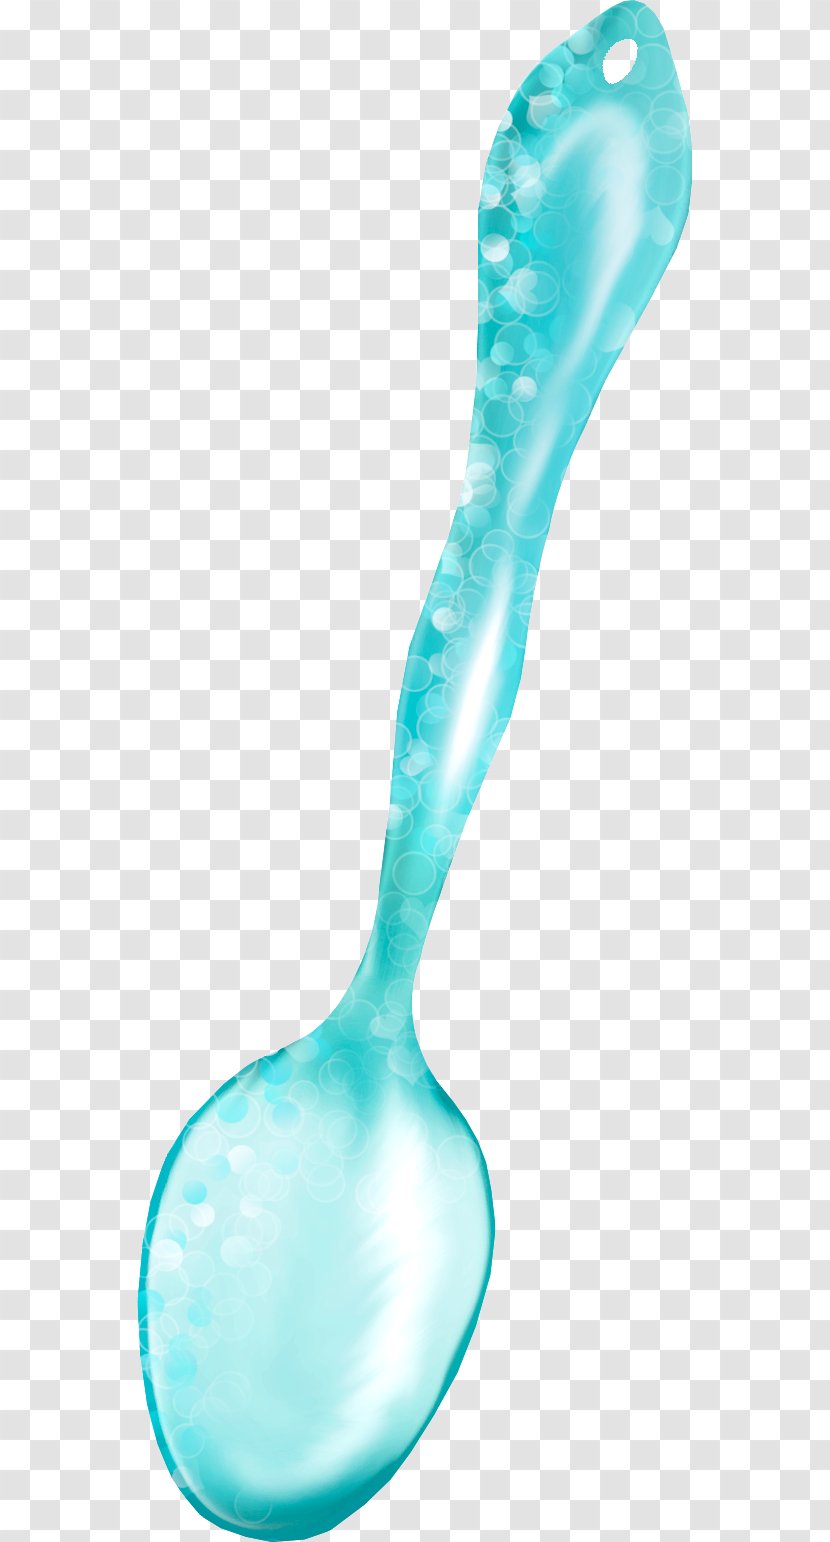 Tablespoon Download - Animation - Spoon Transparent PNG